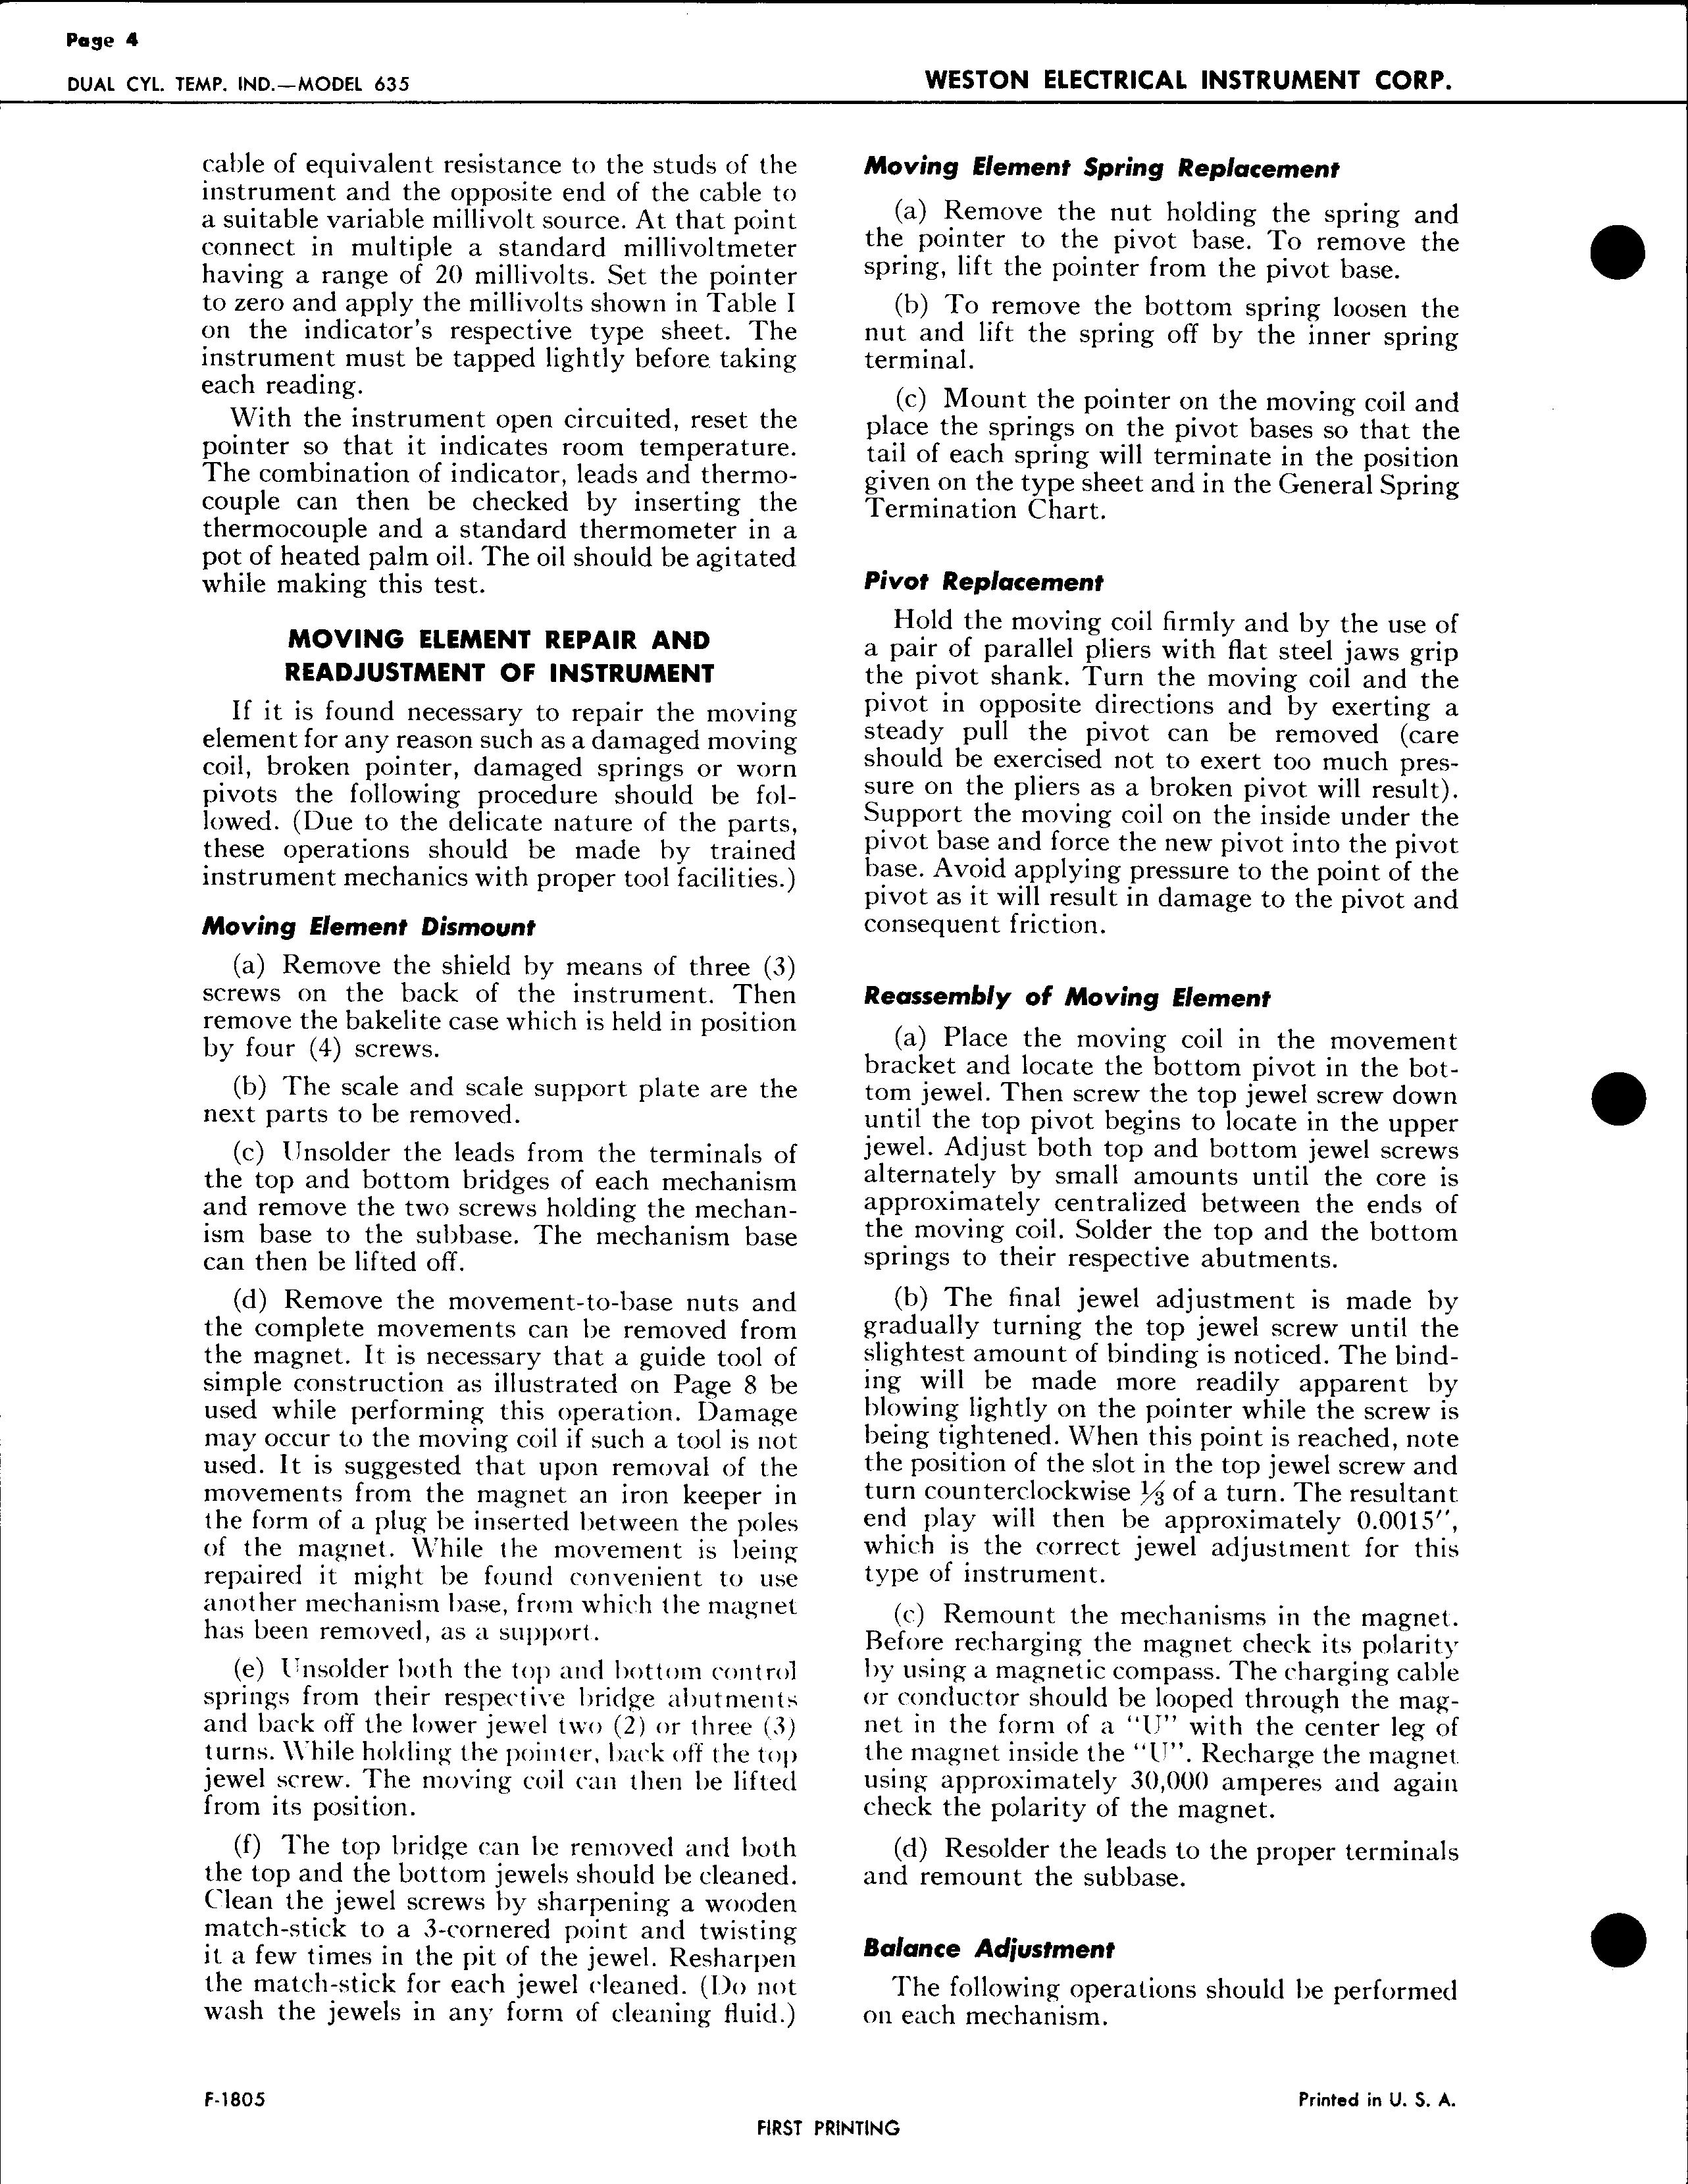 Sample page 4 from AirCorps Library document: Service Instructions for model 635 Dual Cylinder Temperature Indicators